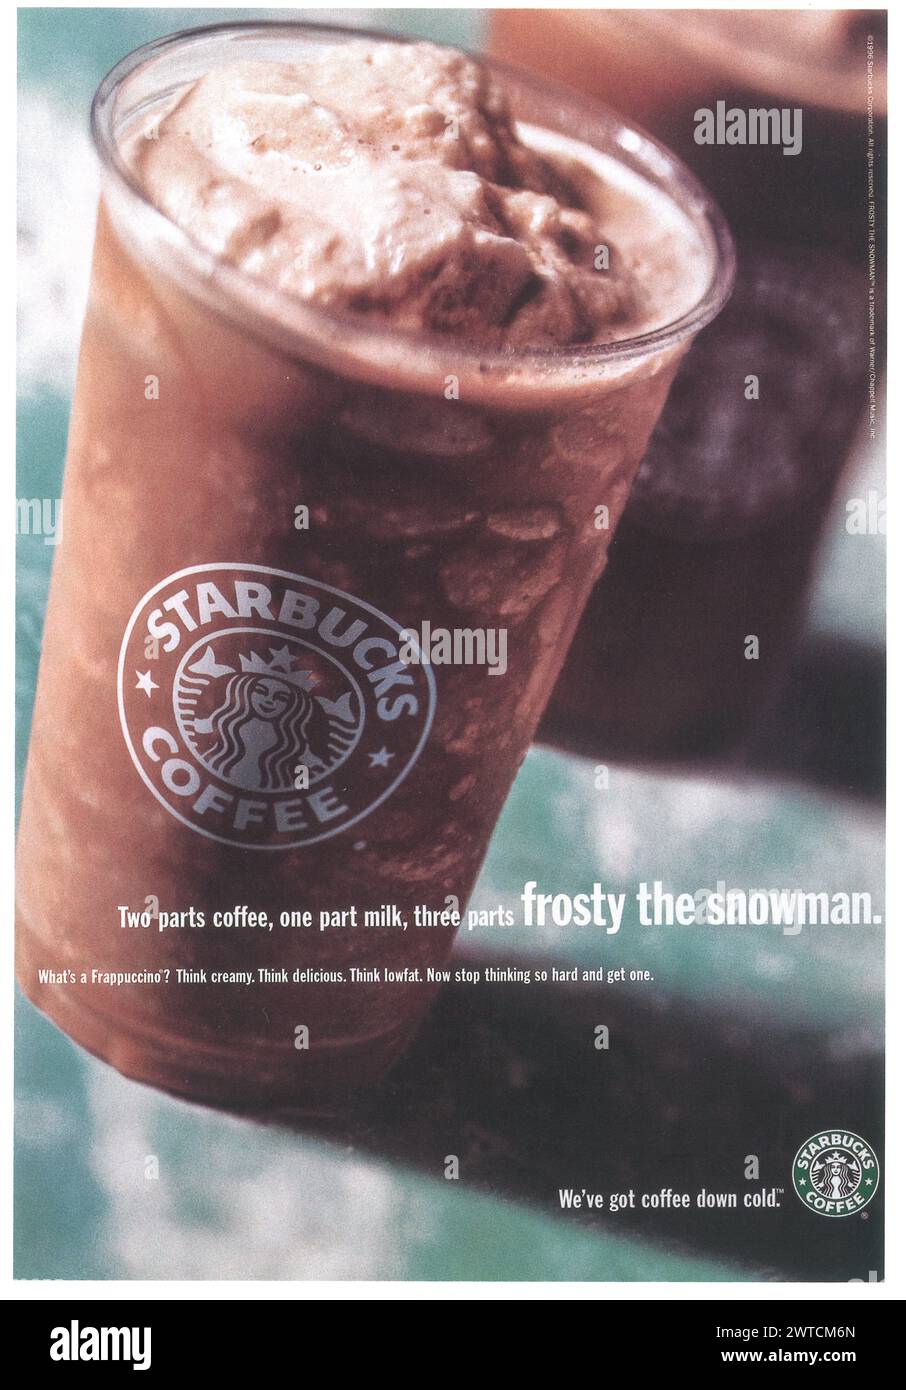 1996 Starbucks Frappuccino coffee in a cup print ad. 'We've got coffee down cold.' Stock Photo